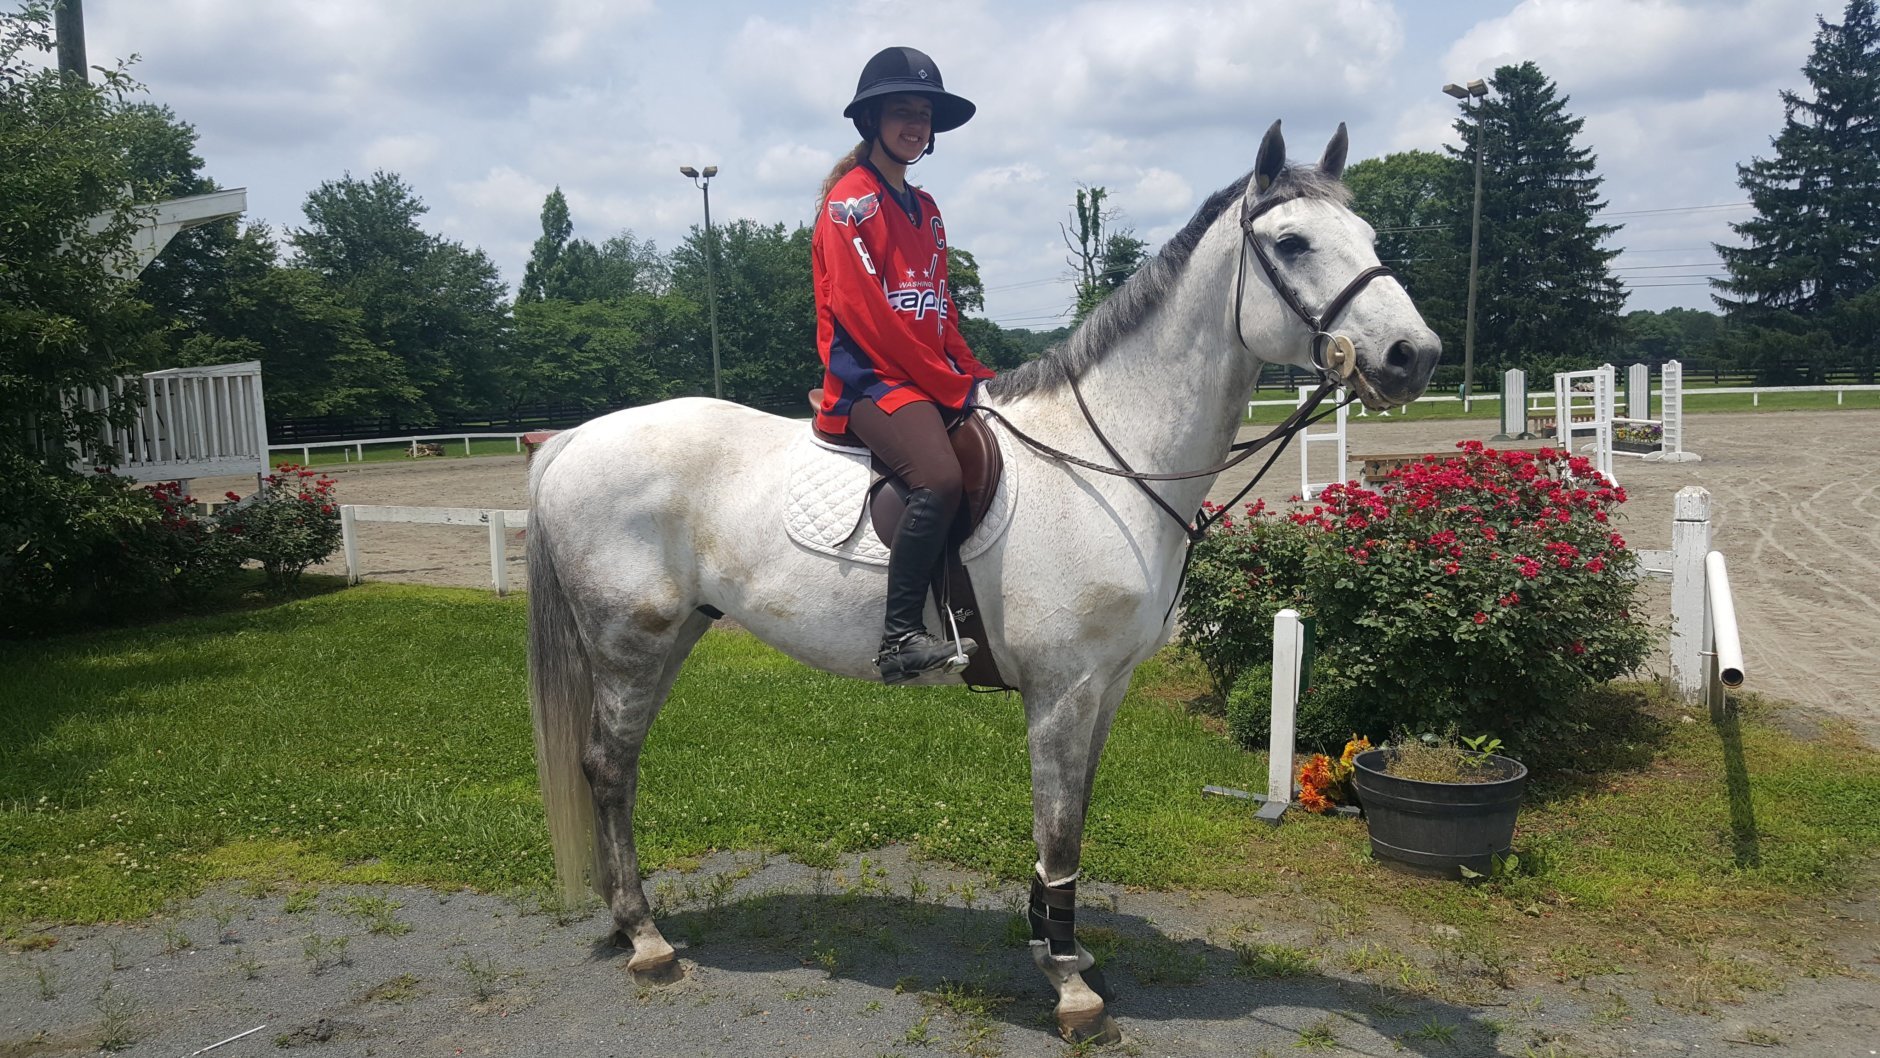 Granddad Bill Solis snapped a pic of his granddaughter, Kayla, and her horse, Cyrano, rocking the red. Bill is a self-described longtime Caps fan. (Courtesy Bill Solis)